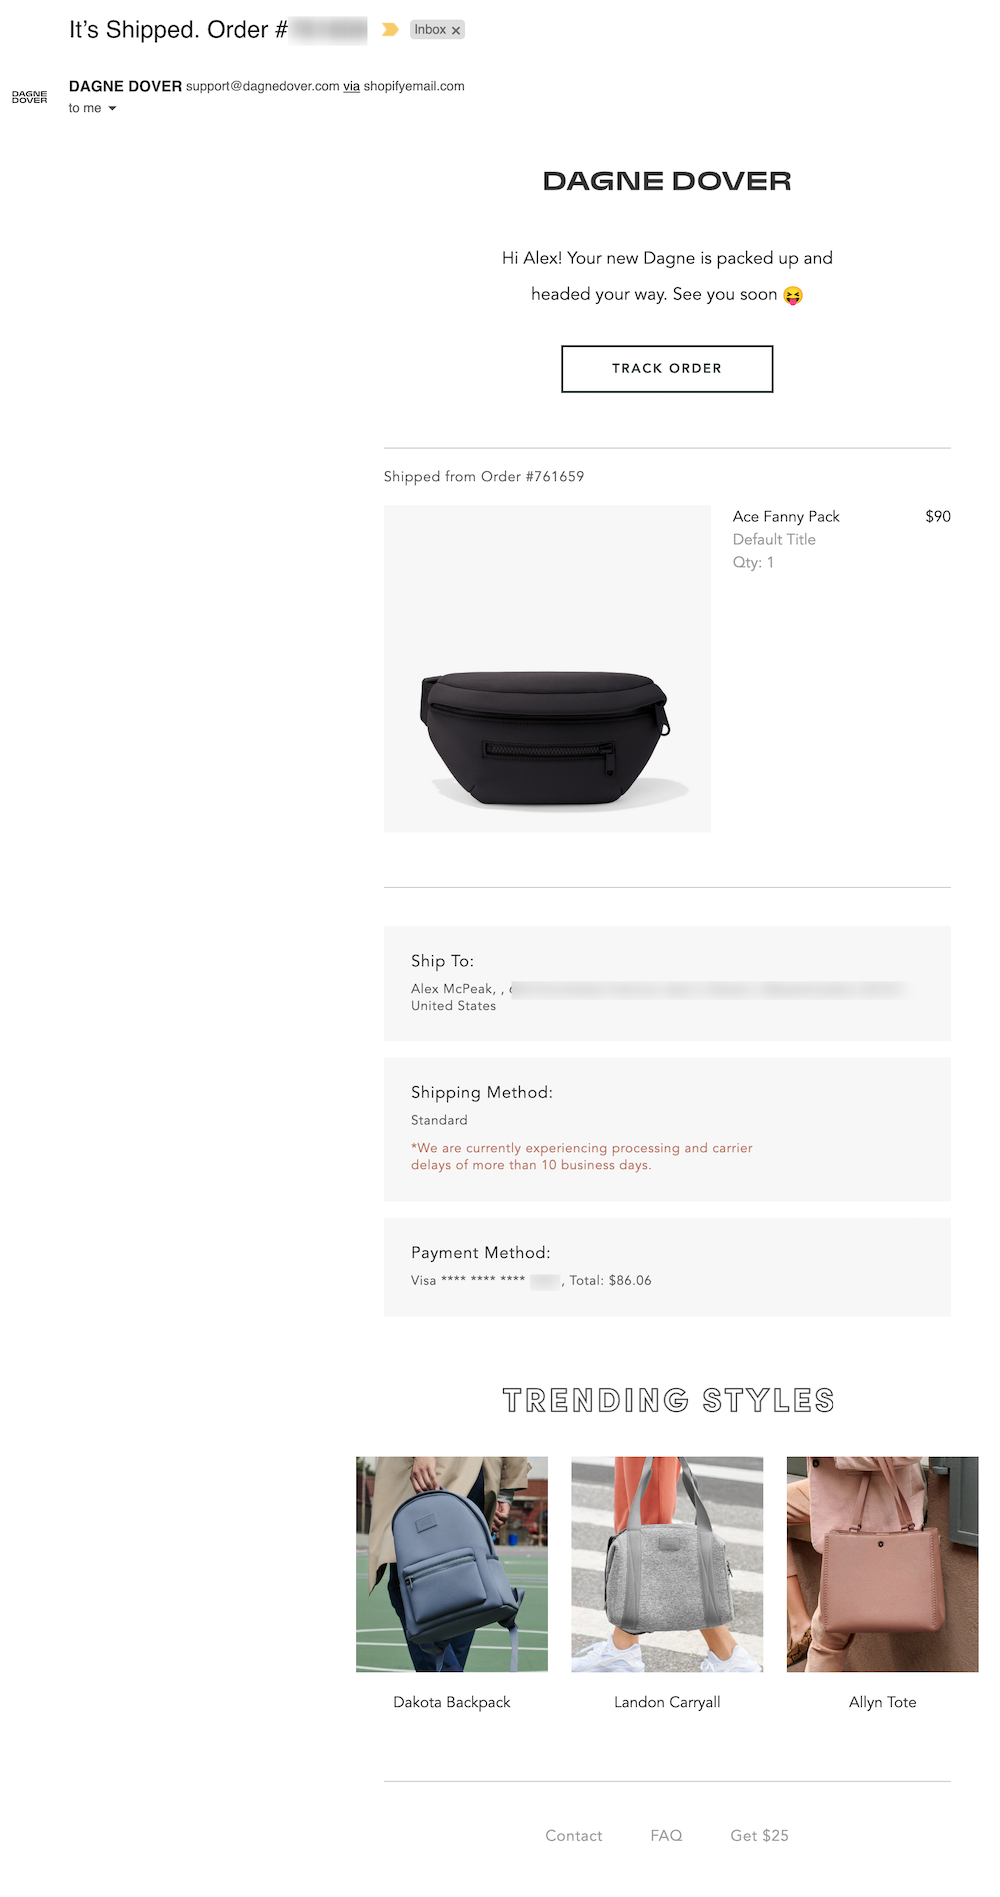 The email from Dagne Dover includes an image of the purchased product, along with a tracking link, product specification, and price. Additionally, customers can double-check the shipping address and method, as well as the payment method.
At the bottom of the email, Dagne Dover adds a trending styles segment where customers can get the latest product recommendations